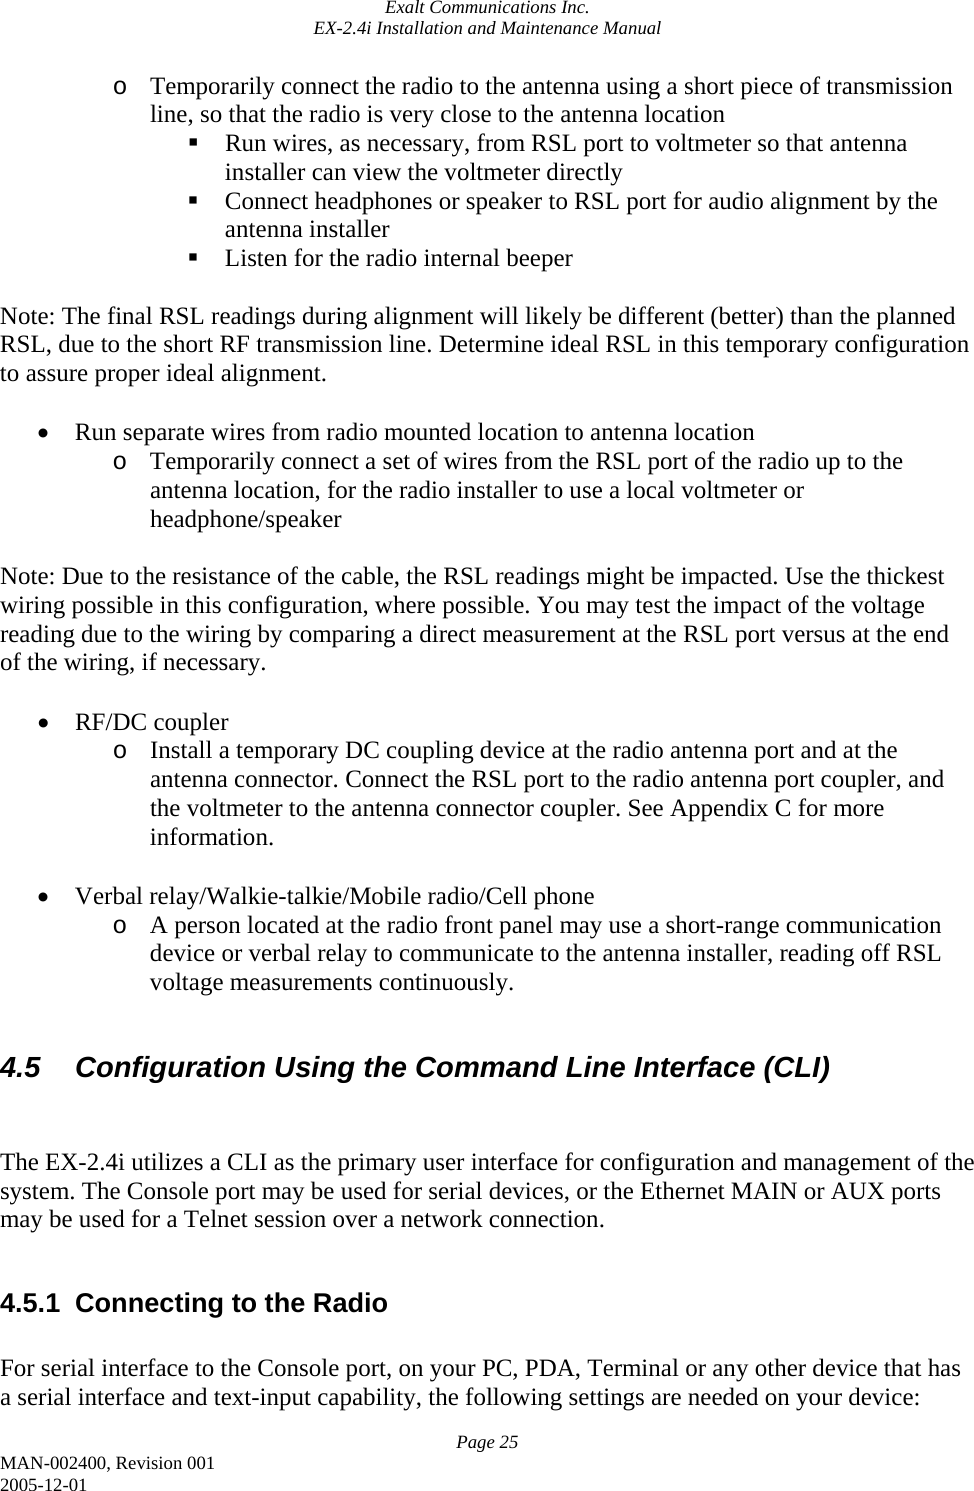 Exalt Communications Inc. EX-2.4i Installation and Maintenance Manual Page 25 MAN-002400, Revision 001 2005-12-01 o Temporarily connect the radio to the antenna using a short piece of transmission line, so that the radio is very close to the antenna location  Run wires, as necessary, from RSL port to voltmeter so that antenna installer can view the voltmeter directly  Connect headphones or speaker to RSL port for audio alignment by the antenna installer  Listen for the radio internal beeper  Note: The final RSL readings during alignment will likely be different (better) than the planned RSL, due to the short RF transmission line. Determine ideal RSL in this temporary configuration to assure proper ideal alignment.  • Run separate wires from radio mounted location to antenna location o Temporarily connect a set of wires from the RSL port of the radio up to the antenna location, for the radio installer to use a local voltmeter or headphone/speaker  Note: Due to the resistance of the cable, the RSL readings might be impacted. Use the thickest wiring possible in this configuration, where possible. You may test the impact of the voltage reading due to the wiring by comparing a direct measurement at the RSL port versus at the end of the wiring, if necessary.  • RF/DC coupler o Install a temporary DC coupling device at the radio antenna port and at the antenna connector. Connect the RSL port to the radio antenna port coupler, and the voltmeter to the antenna connector coupler. See Appendix C for more information.  • Verbal relay/Walkie-talkie/Mobile radio/Cell phone o A person located at the radio front panel may use a short-range communication device or verbal relay to communicate to the antenna installer, reading off RSL voltage measurements continuously.  4.5  Configuration Using the Command Line Interface (CLI)   The EX-2.4i utilizes a CLI as the primary user interface for configuration and management of the system. The Console port may be used for serial devices, or the Ethernet MAIN or AUX ports may be used for a Telnet session over a network connection.  4.5.1  Connecting to the Radio  For serial interface to the Console port, on your PC, PDA, Terminal or any other device that has a serial interface and text-input capability, the following settings are needed on your device: 